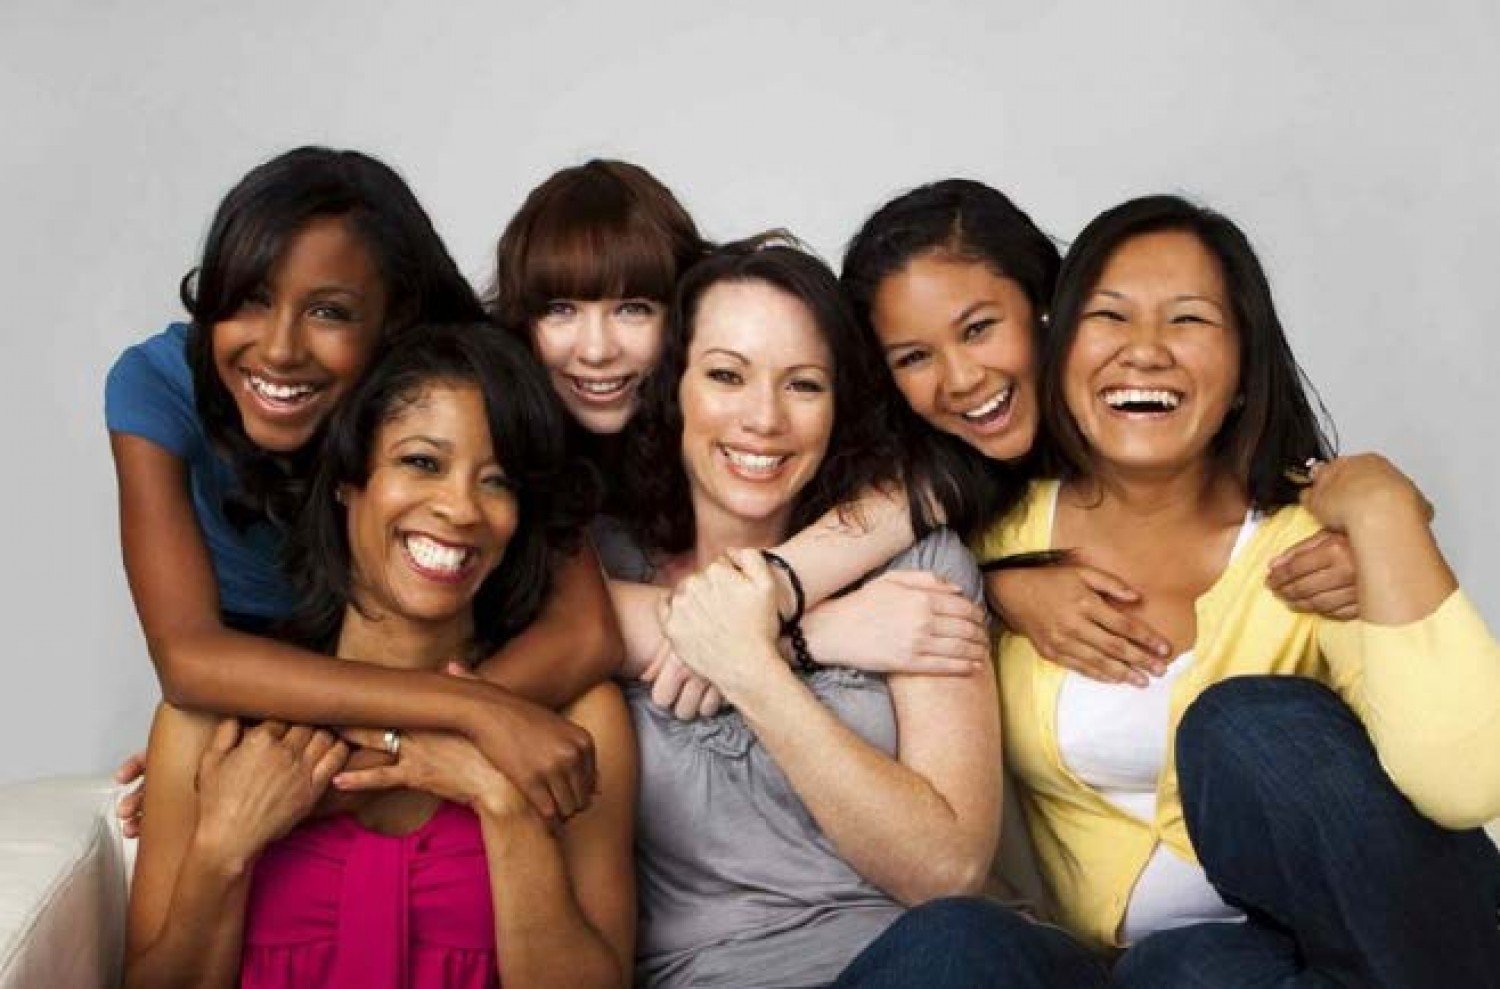 Building Community - Women Need Each Other!